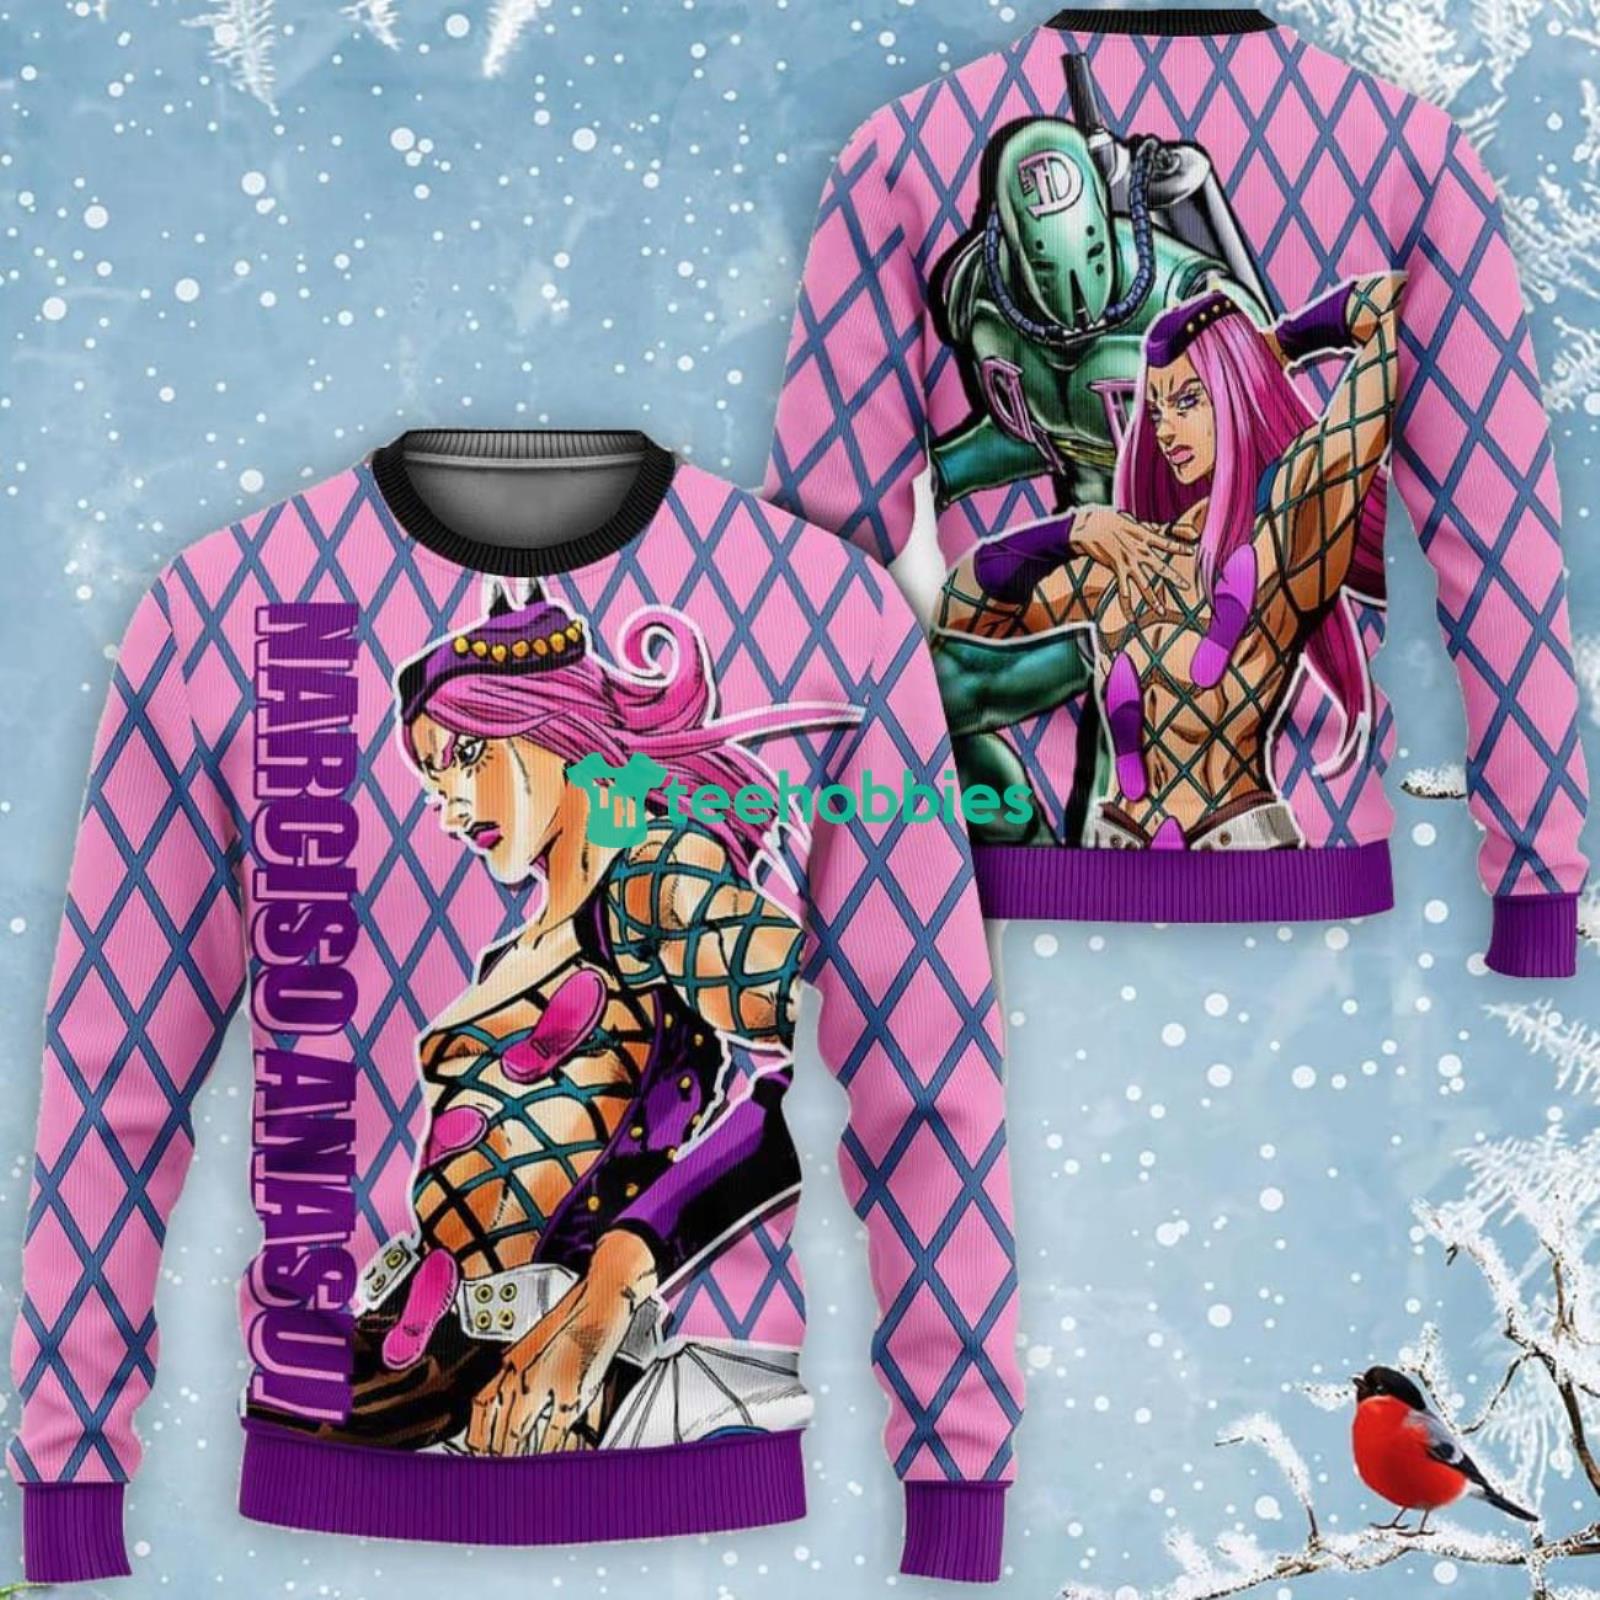 Narciso Anasui All Over Printed 3D Shirt Custom Anime Fans JJBAs Product Photo 2 Product photo 2